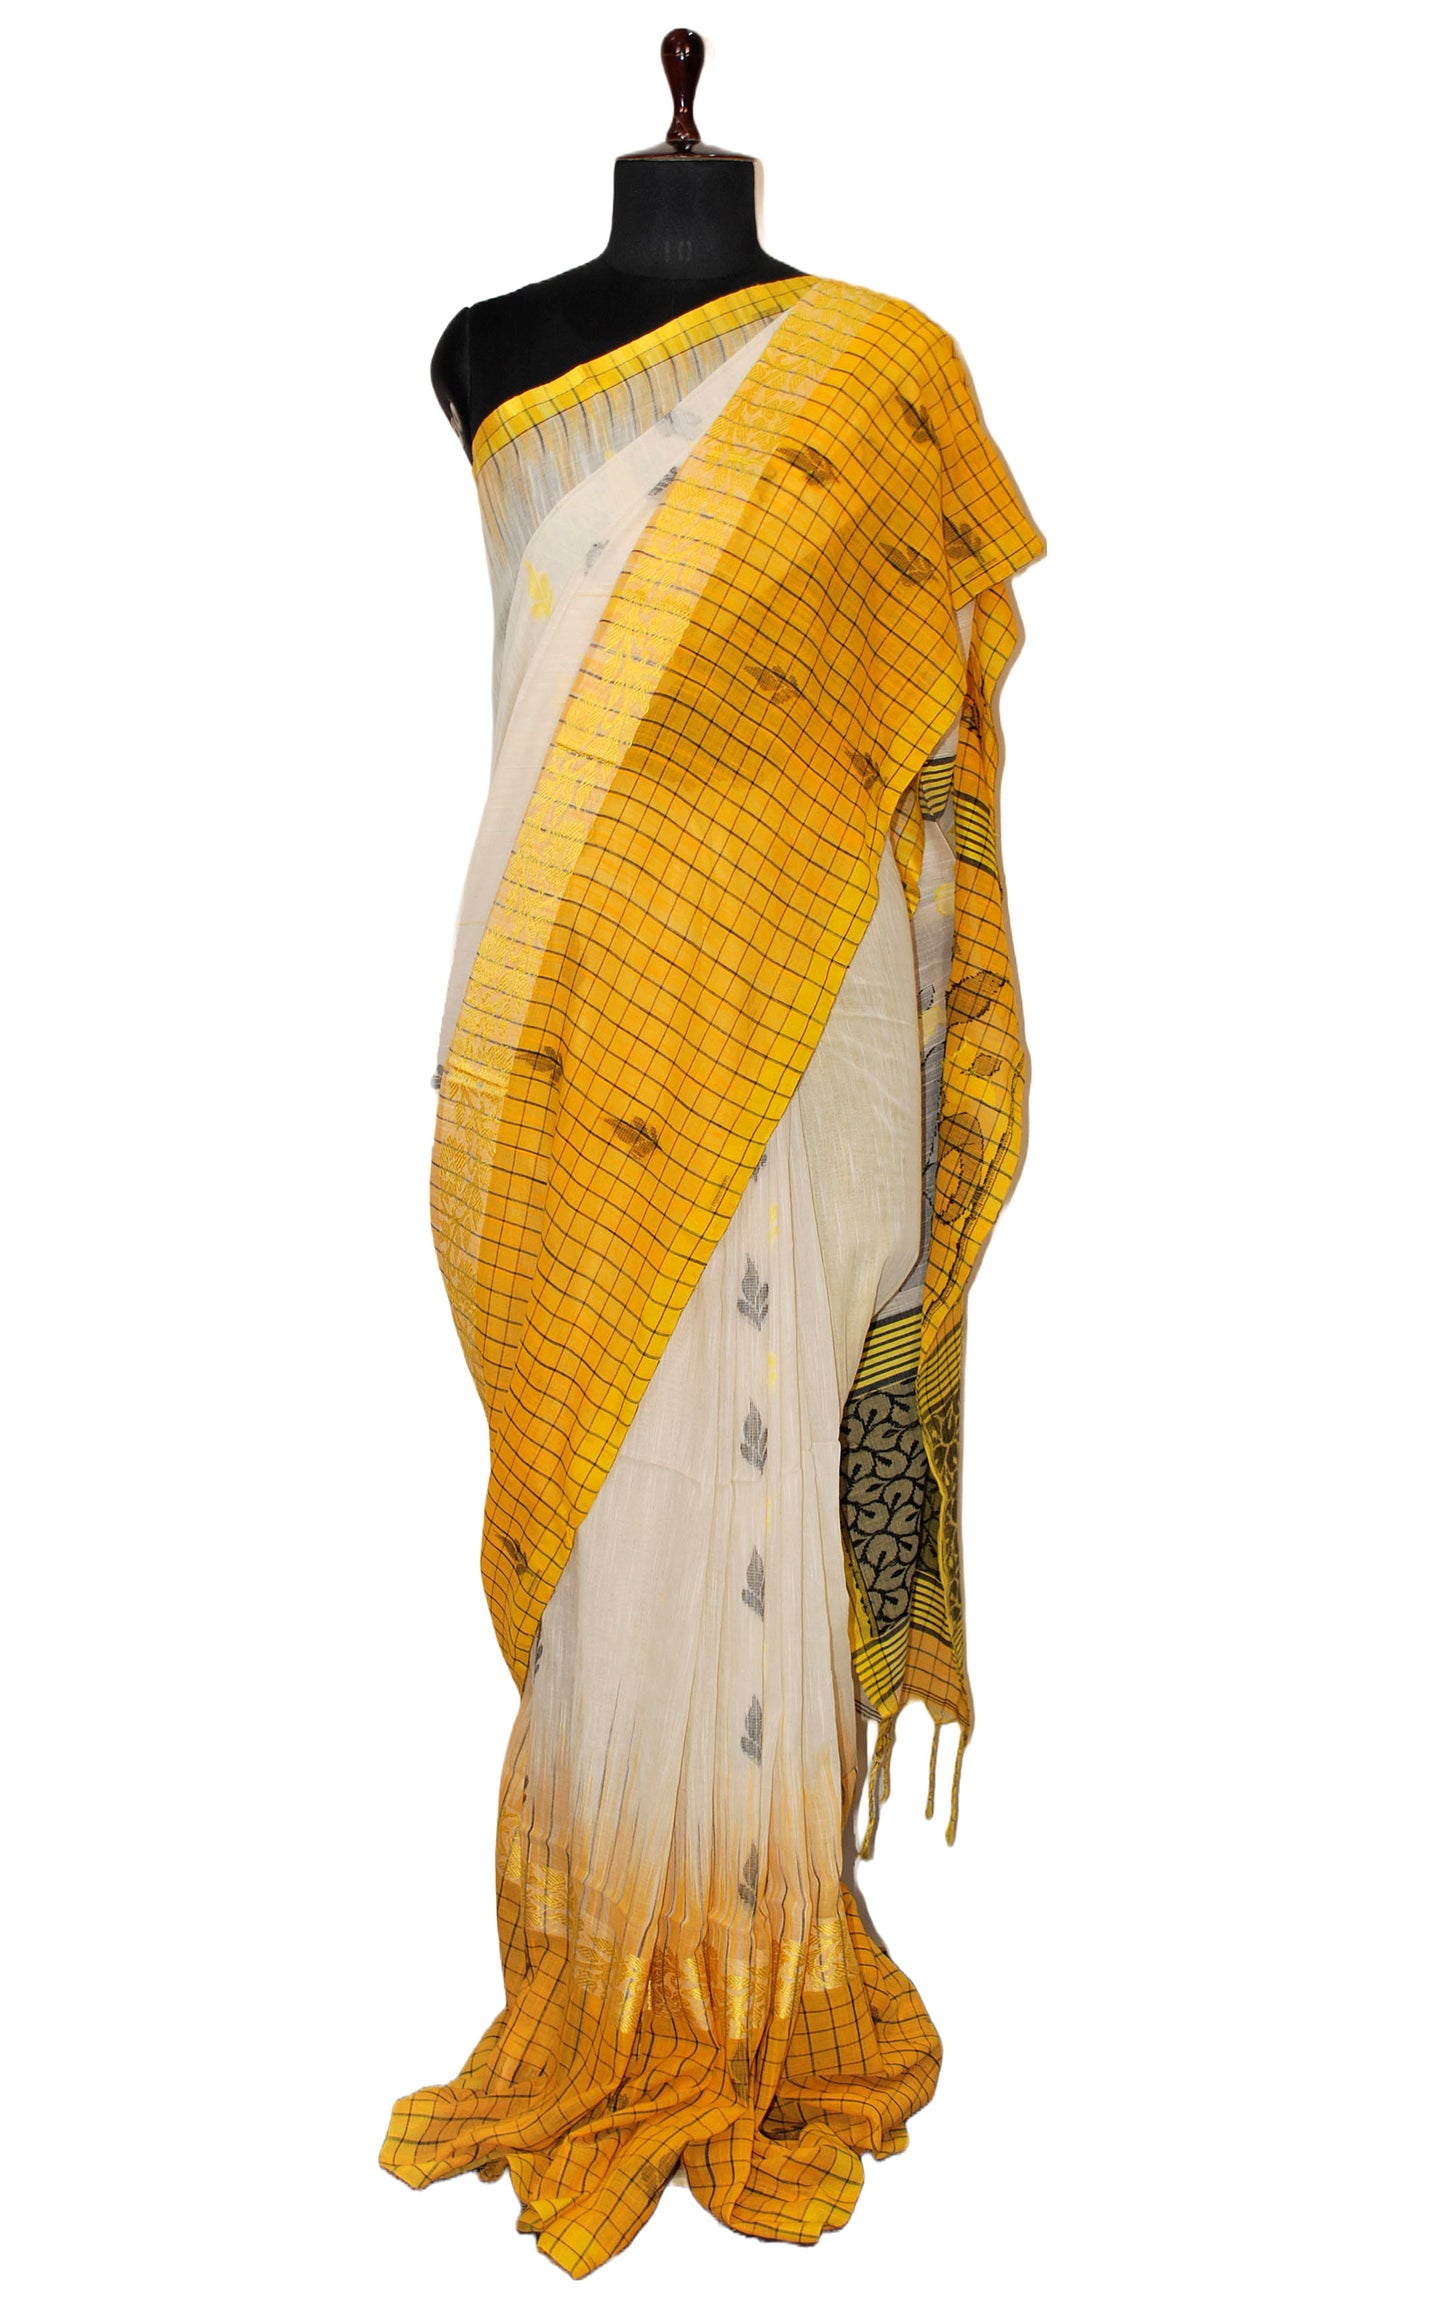 Woven Checks Skirt Border Soft Cotton Saree in Off White, Black and Yellow